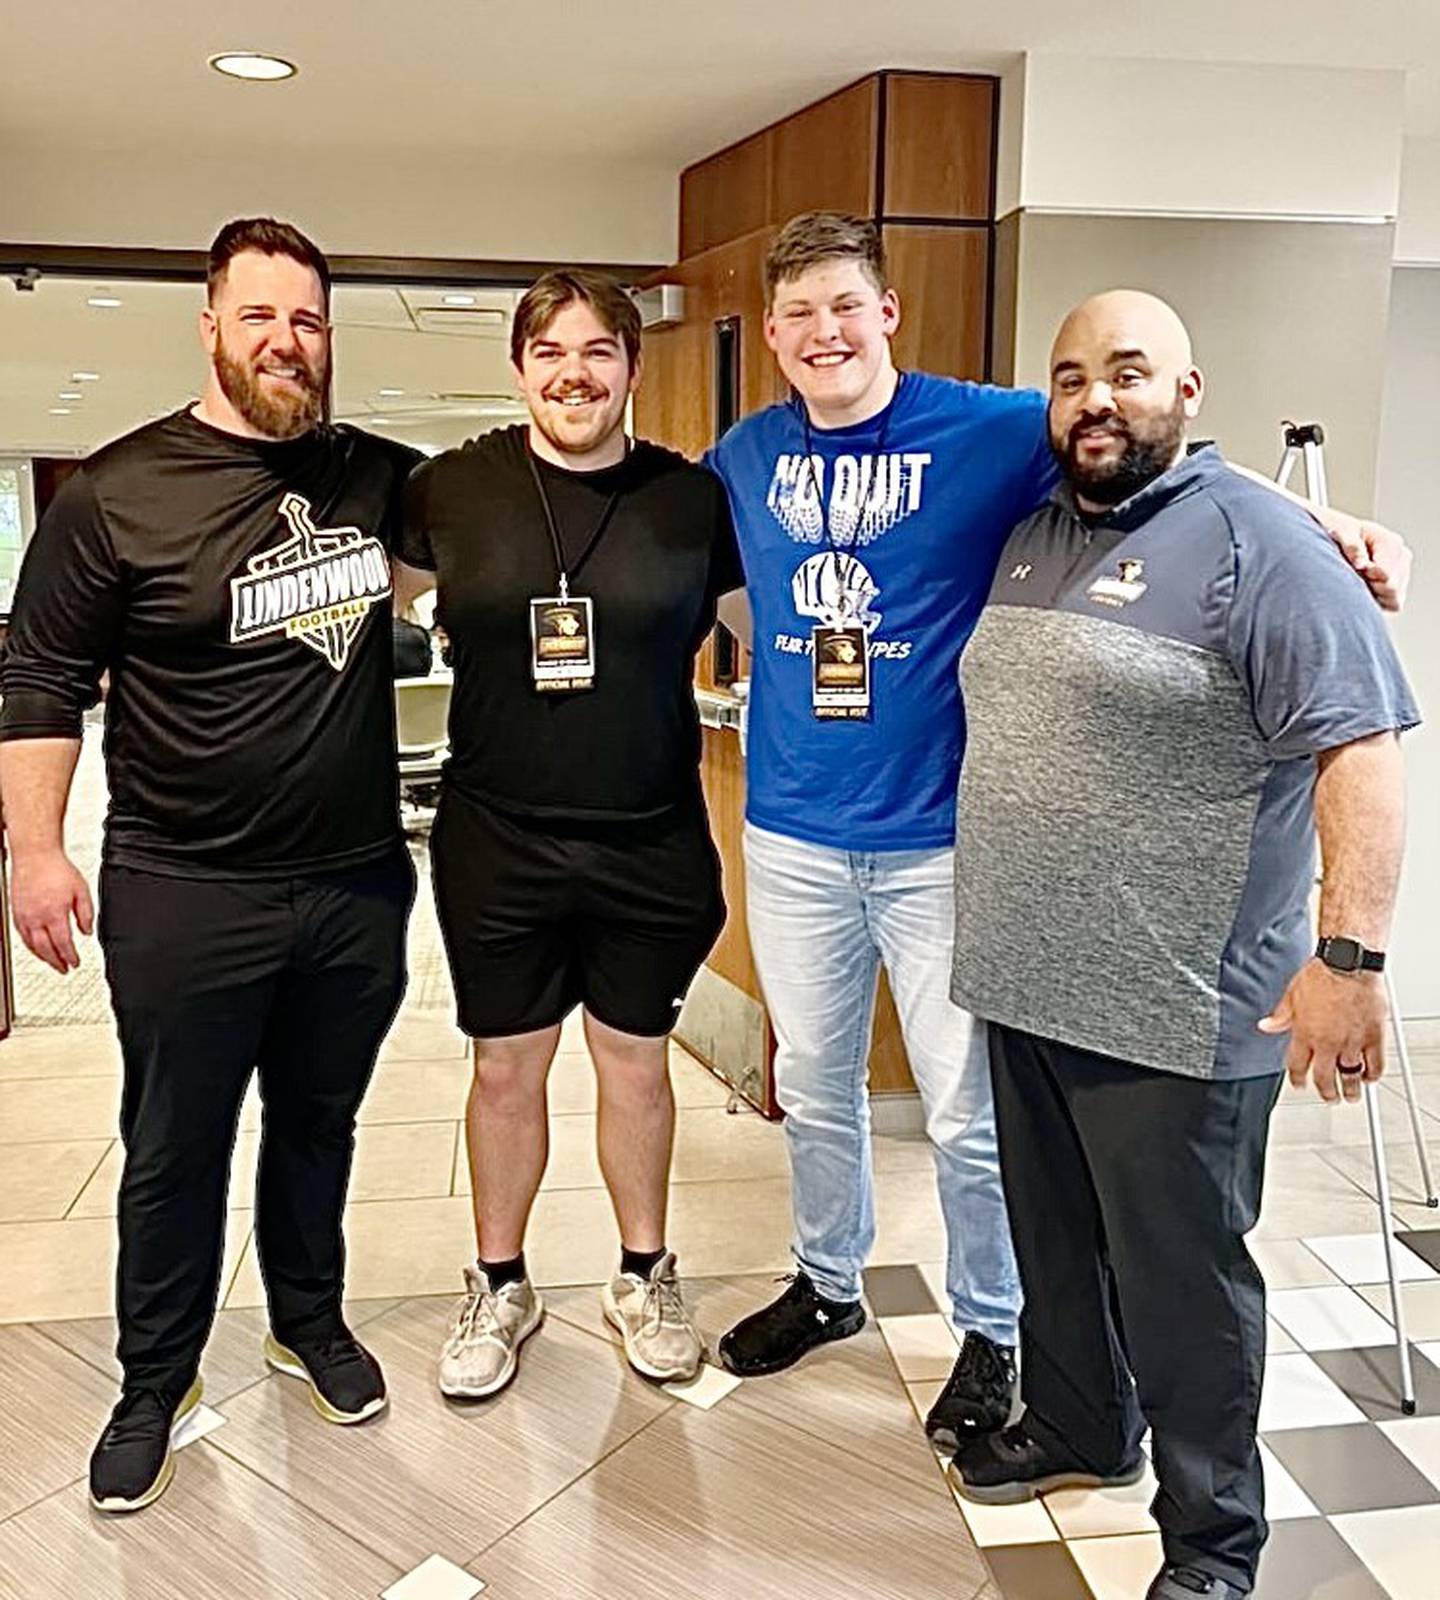 Princeton High School juniors Payne Miller (second from left) and Bennett Williams both were recent guests of Lindenwood University in St. Charles, Mo.